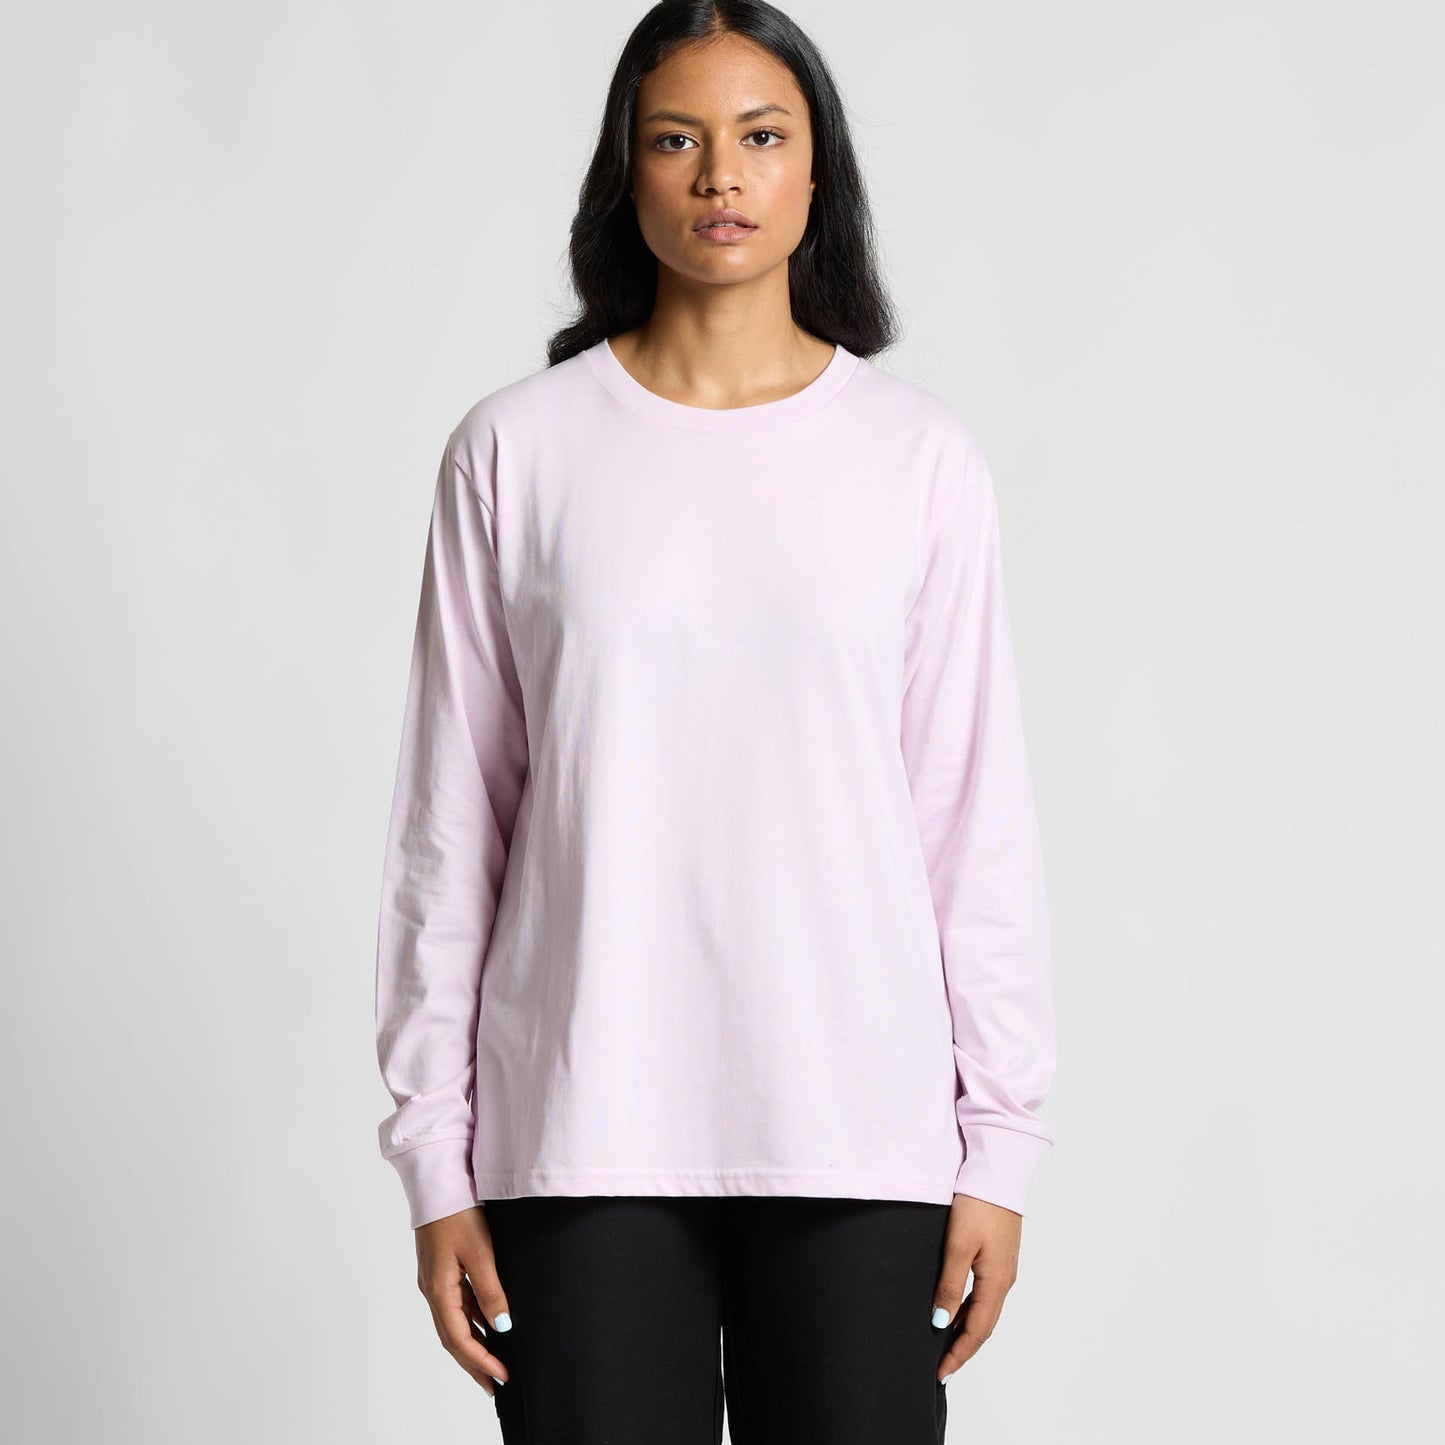 AS Colour Wo's Classic L/S Tee - 4073